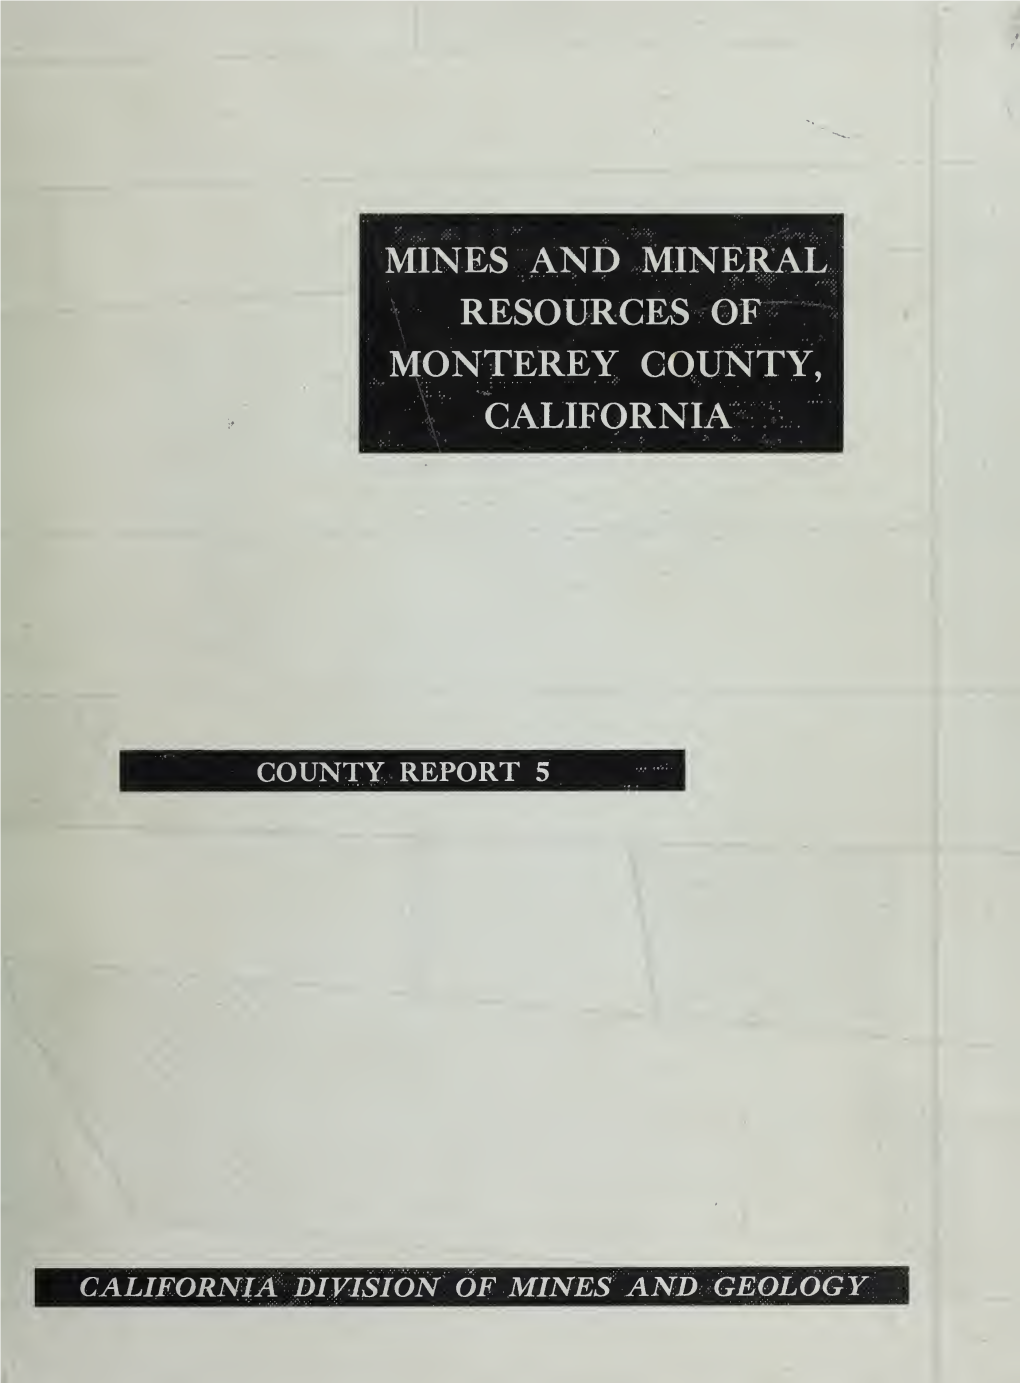 Mines and Mineral Resources of Monterey County, California